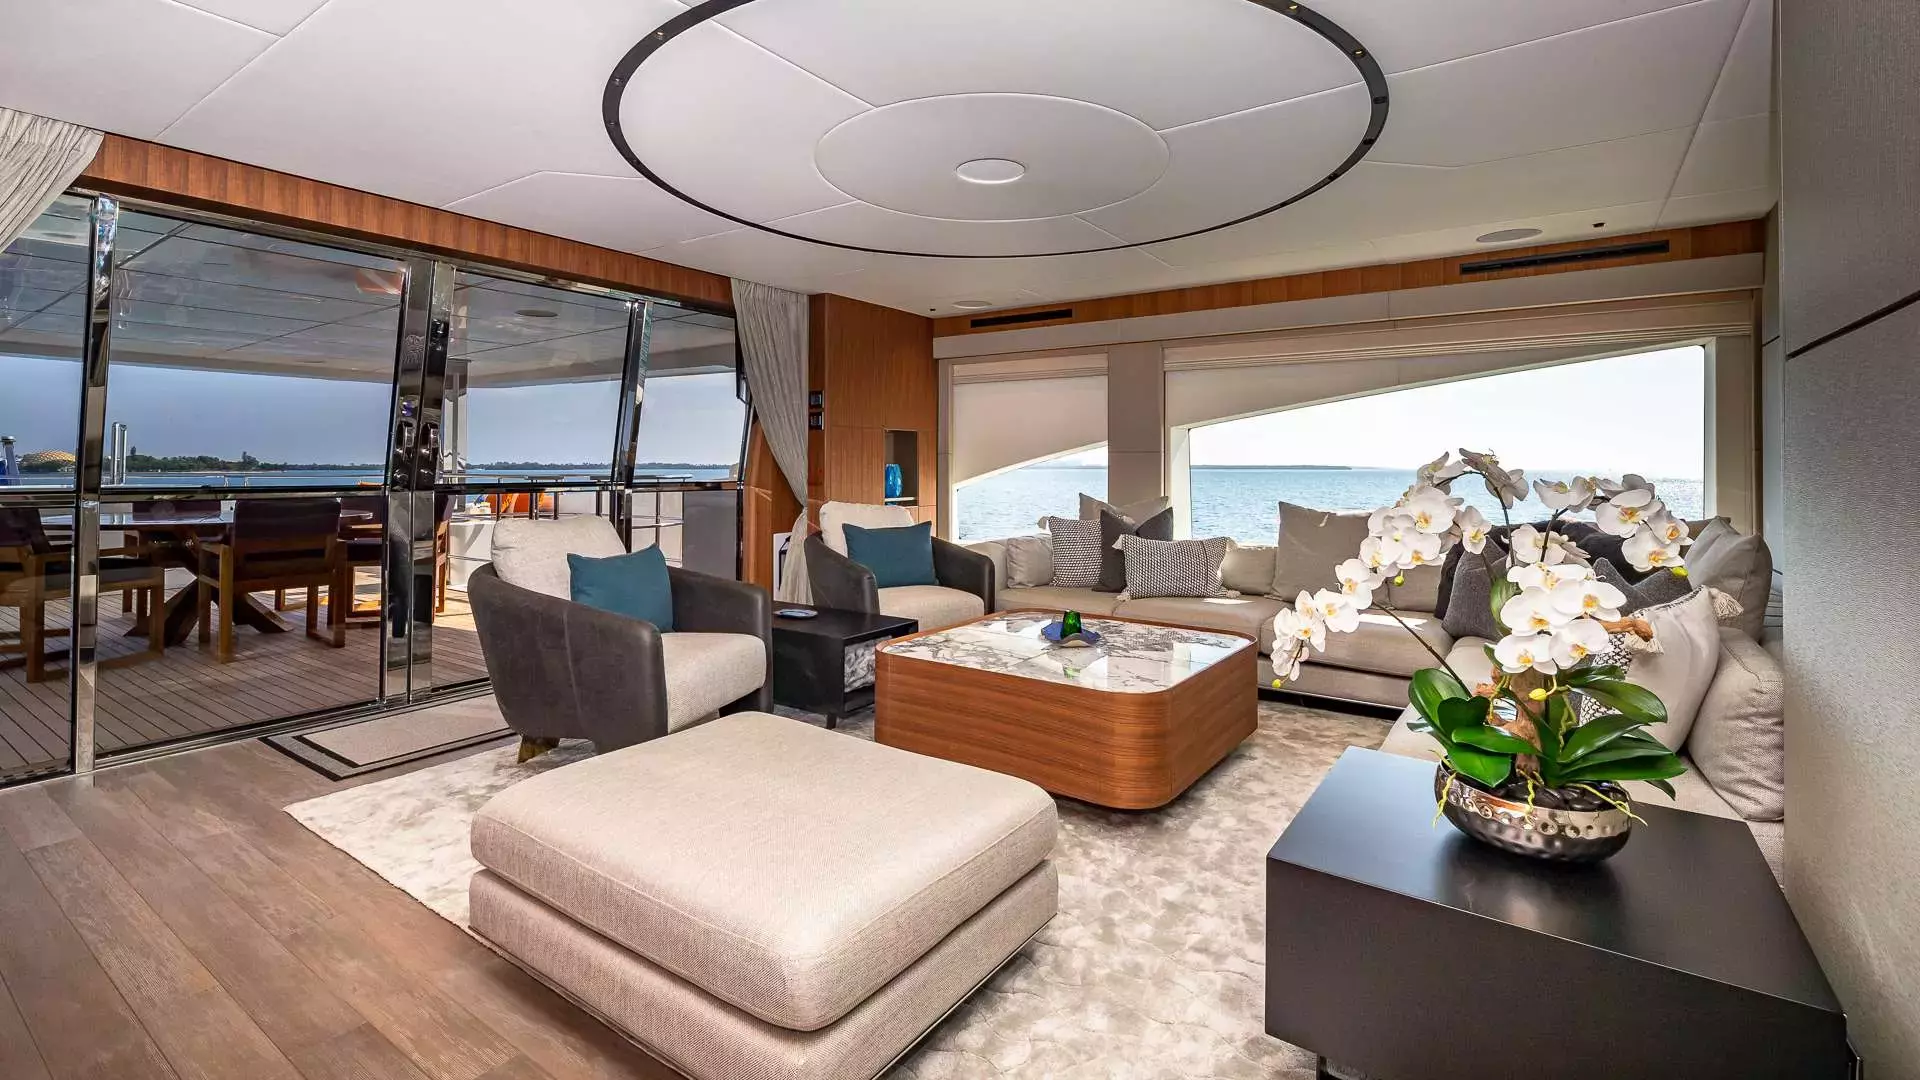 Rising Dawn by Gulf Craft - Top rates for a Charter of a private Superyacht in Bahamas